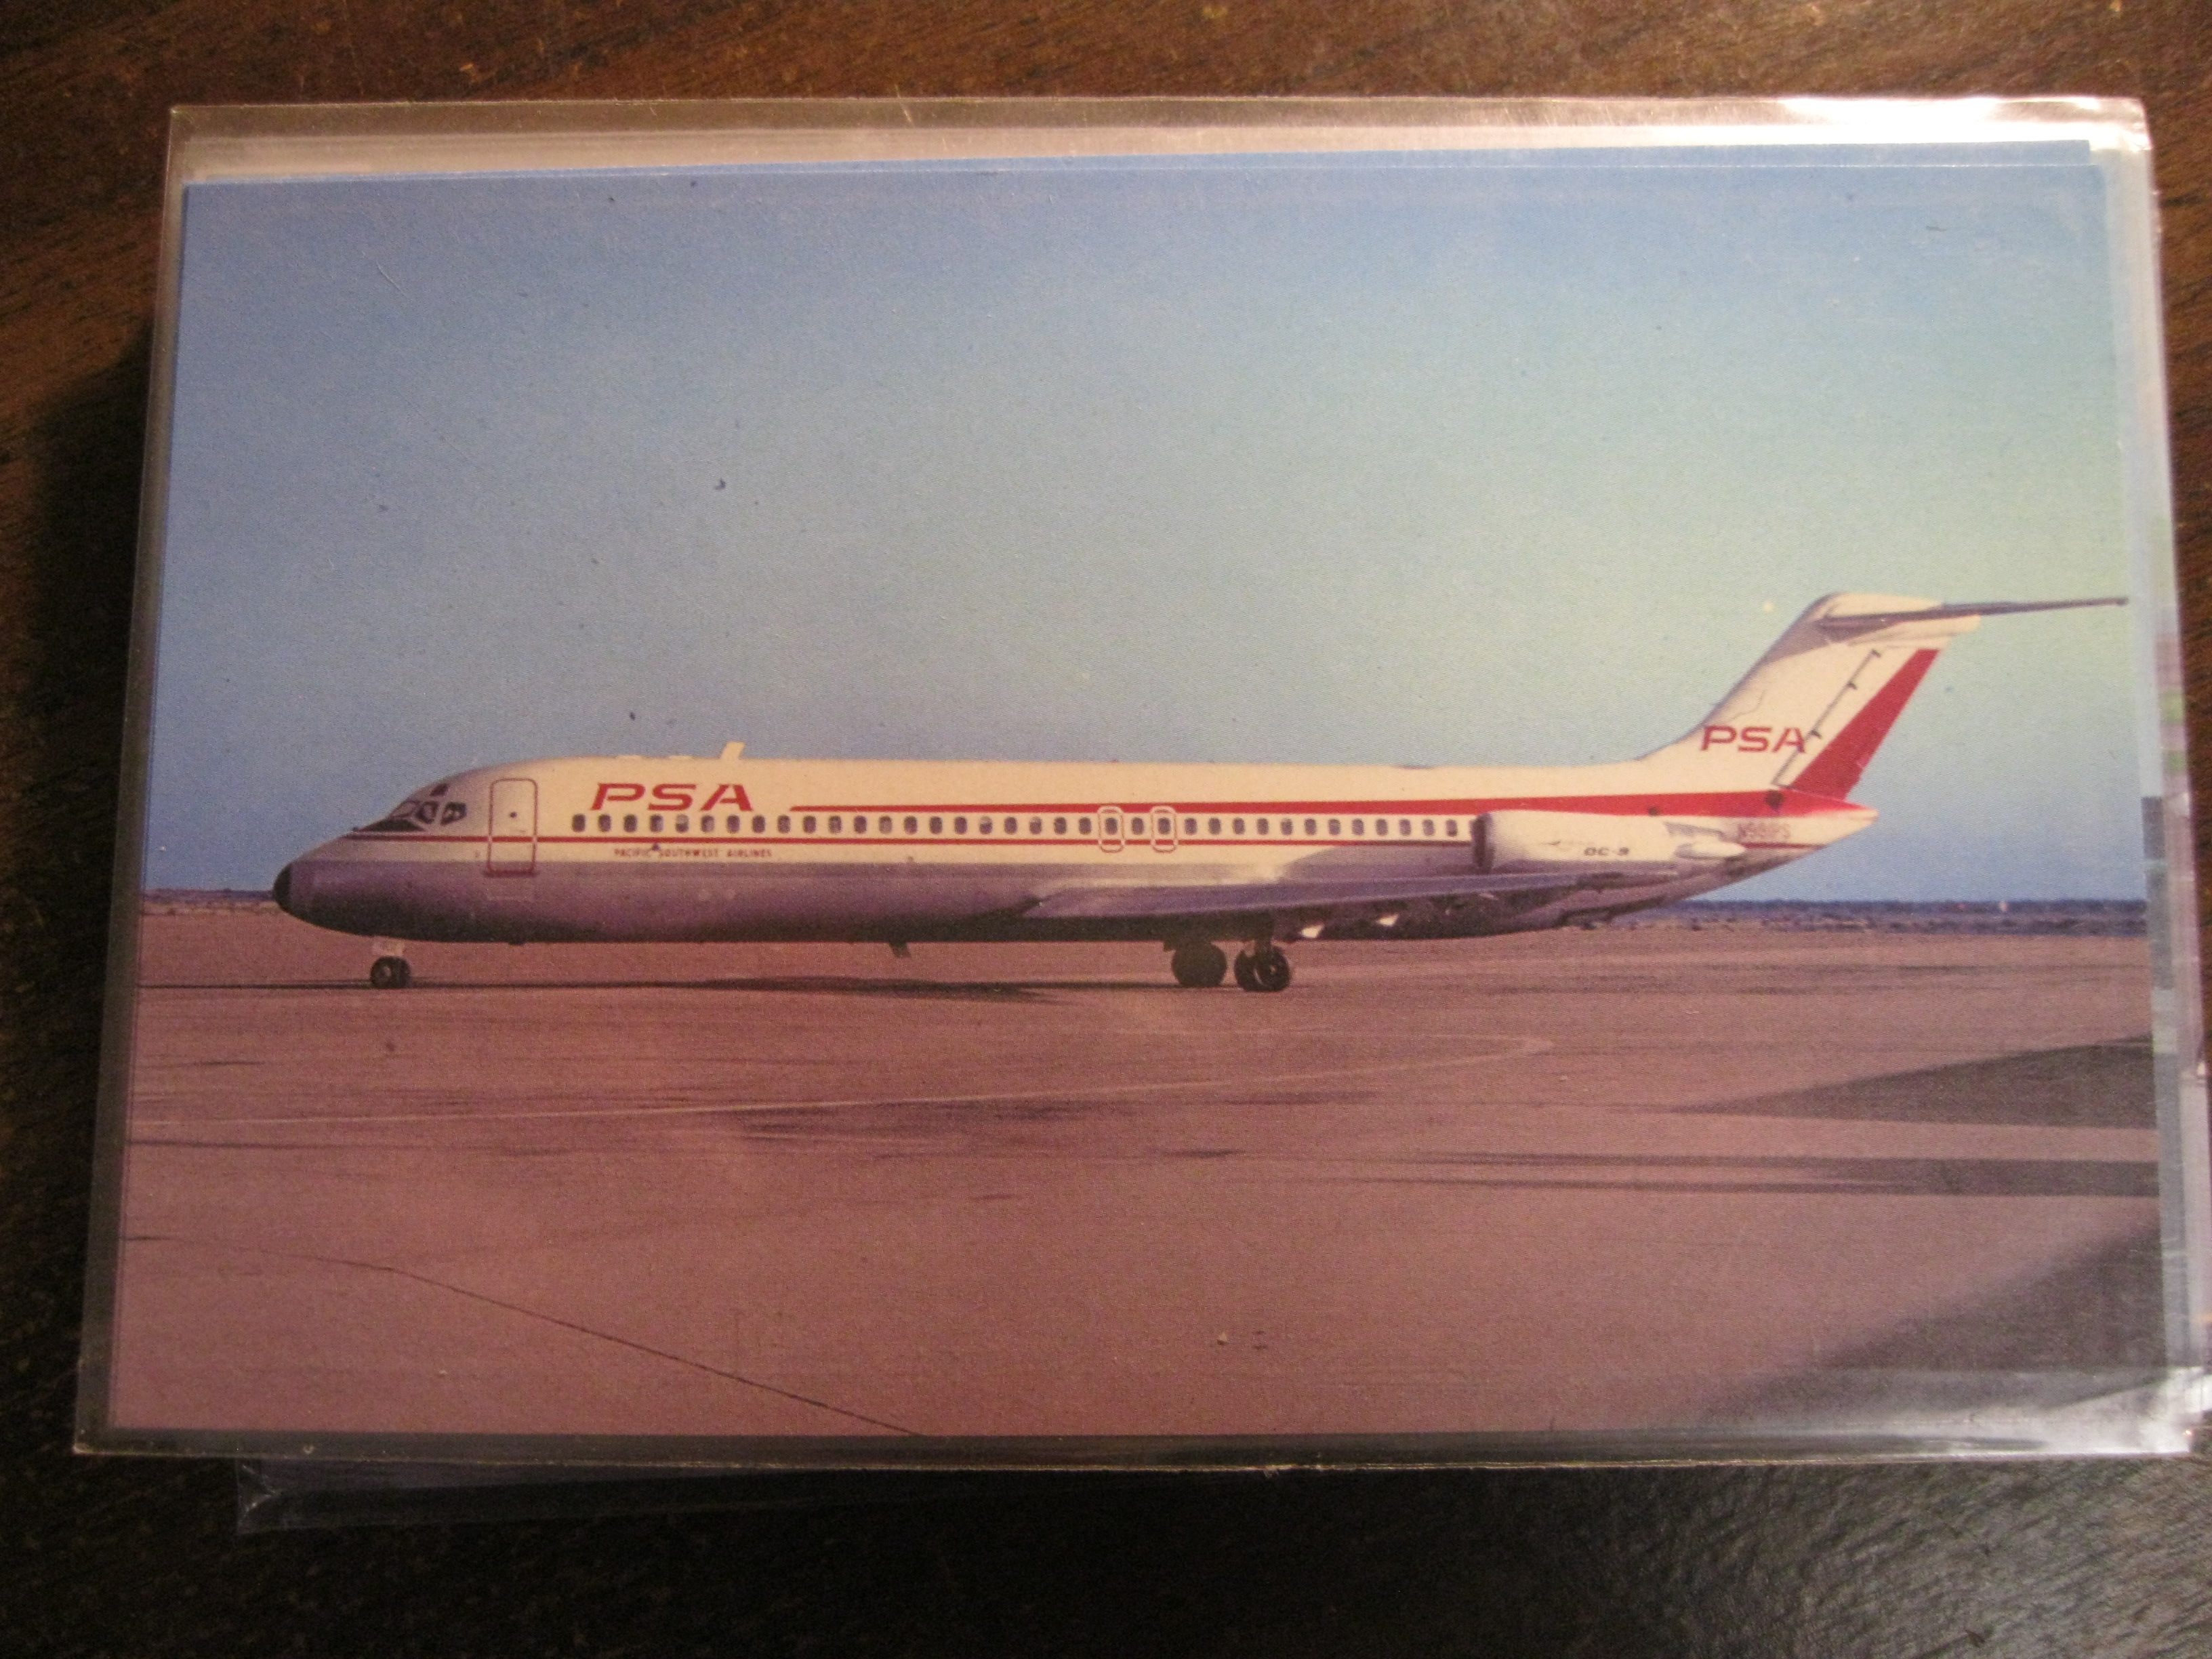 Pacific Southwest Airlines DC-9 post card